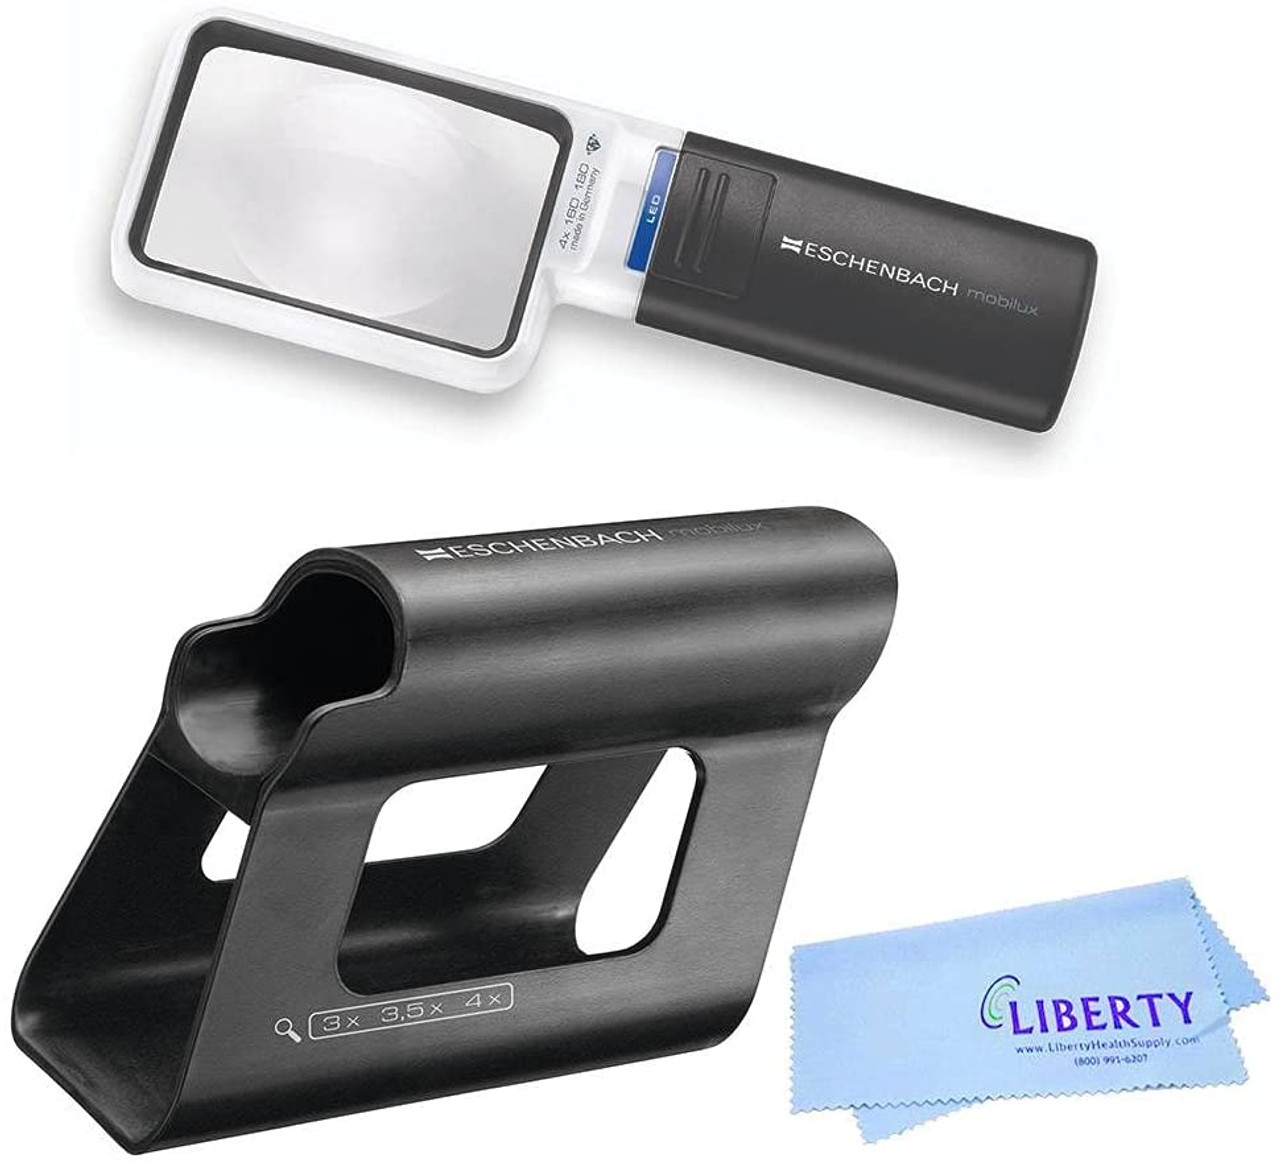 Eschenbach Mobilux LED Handheld Magnifier with Mobase Stand - Hands Free Magnifier  with Light and Stand - 3.5x and 4x Magnification - Low Vision Magnifier Aid  with Liberty Microfiber Cloth